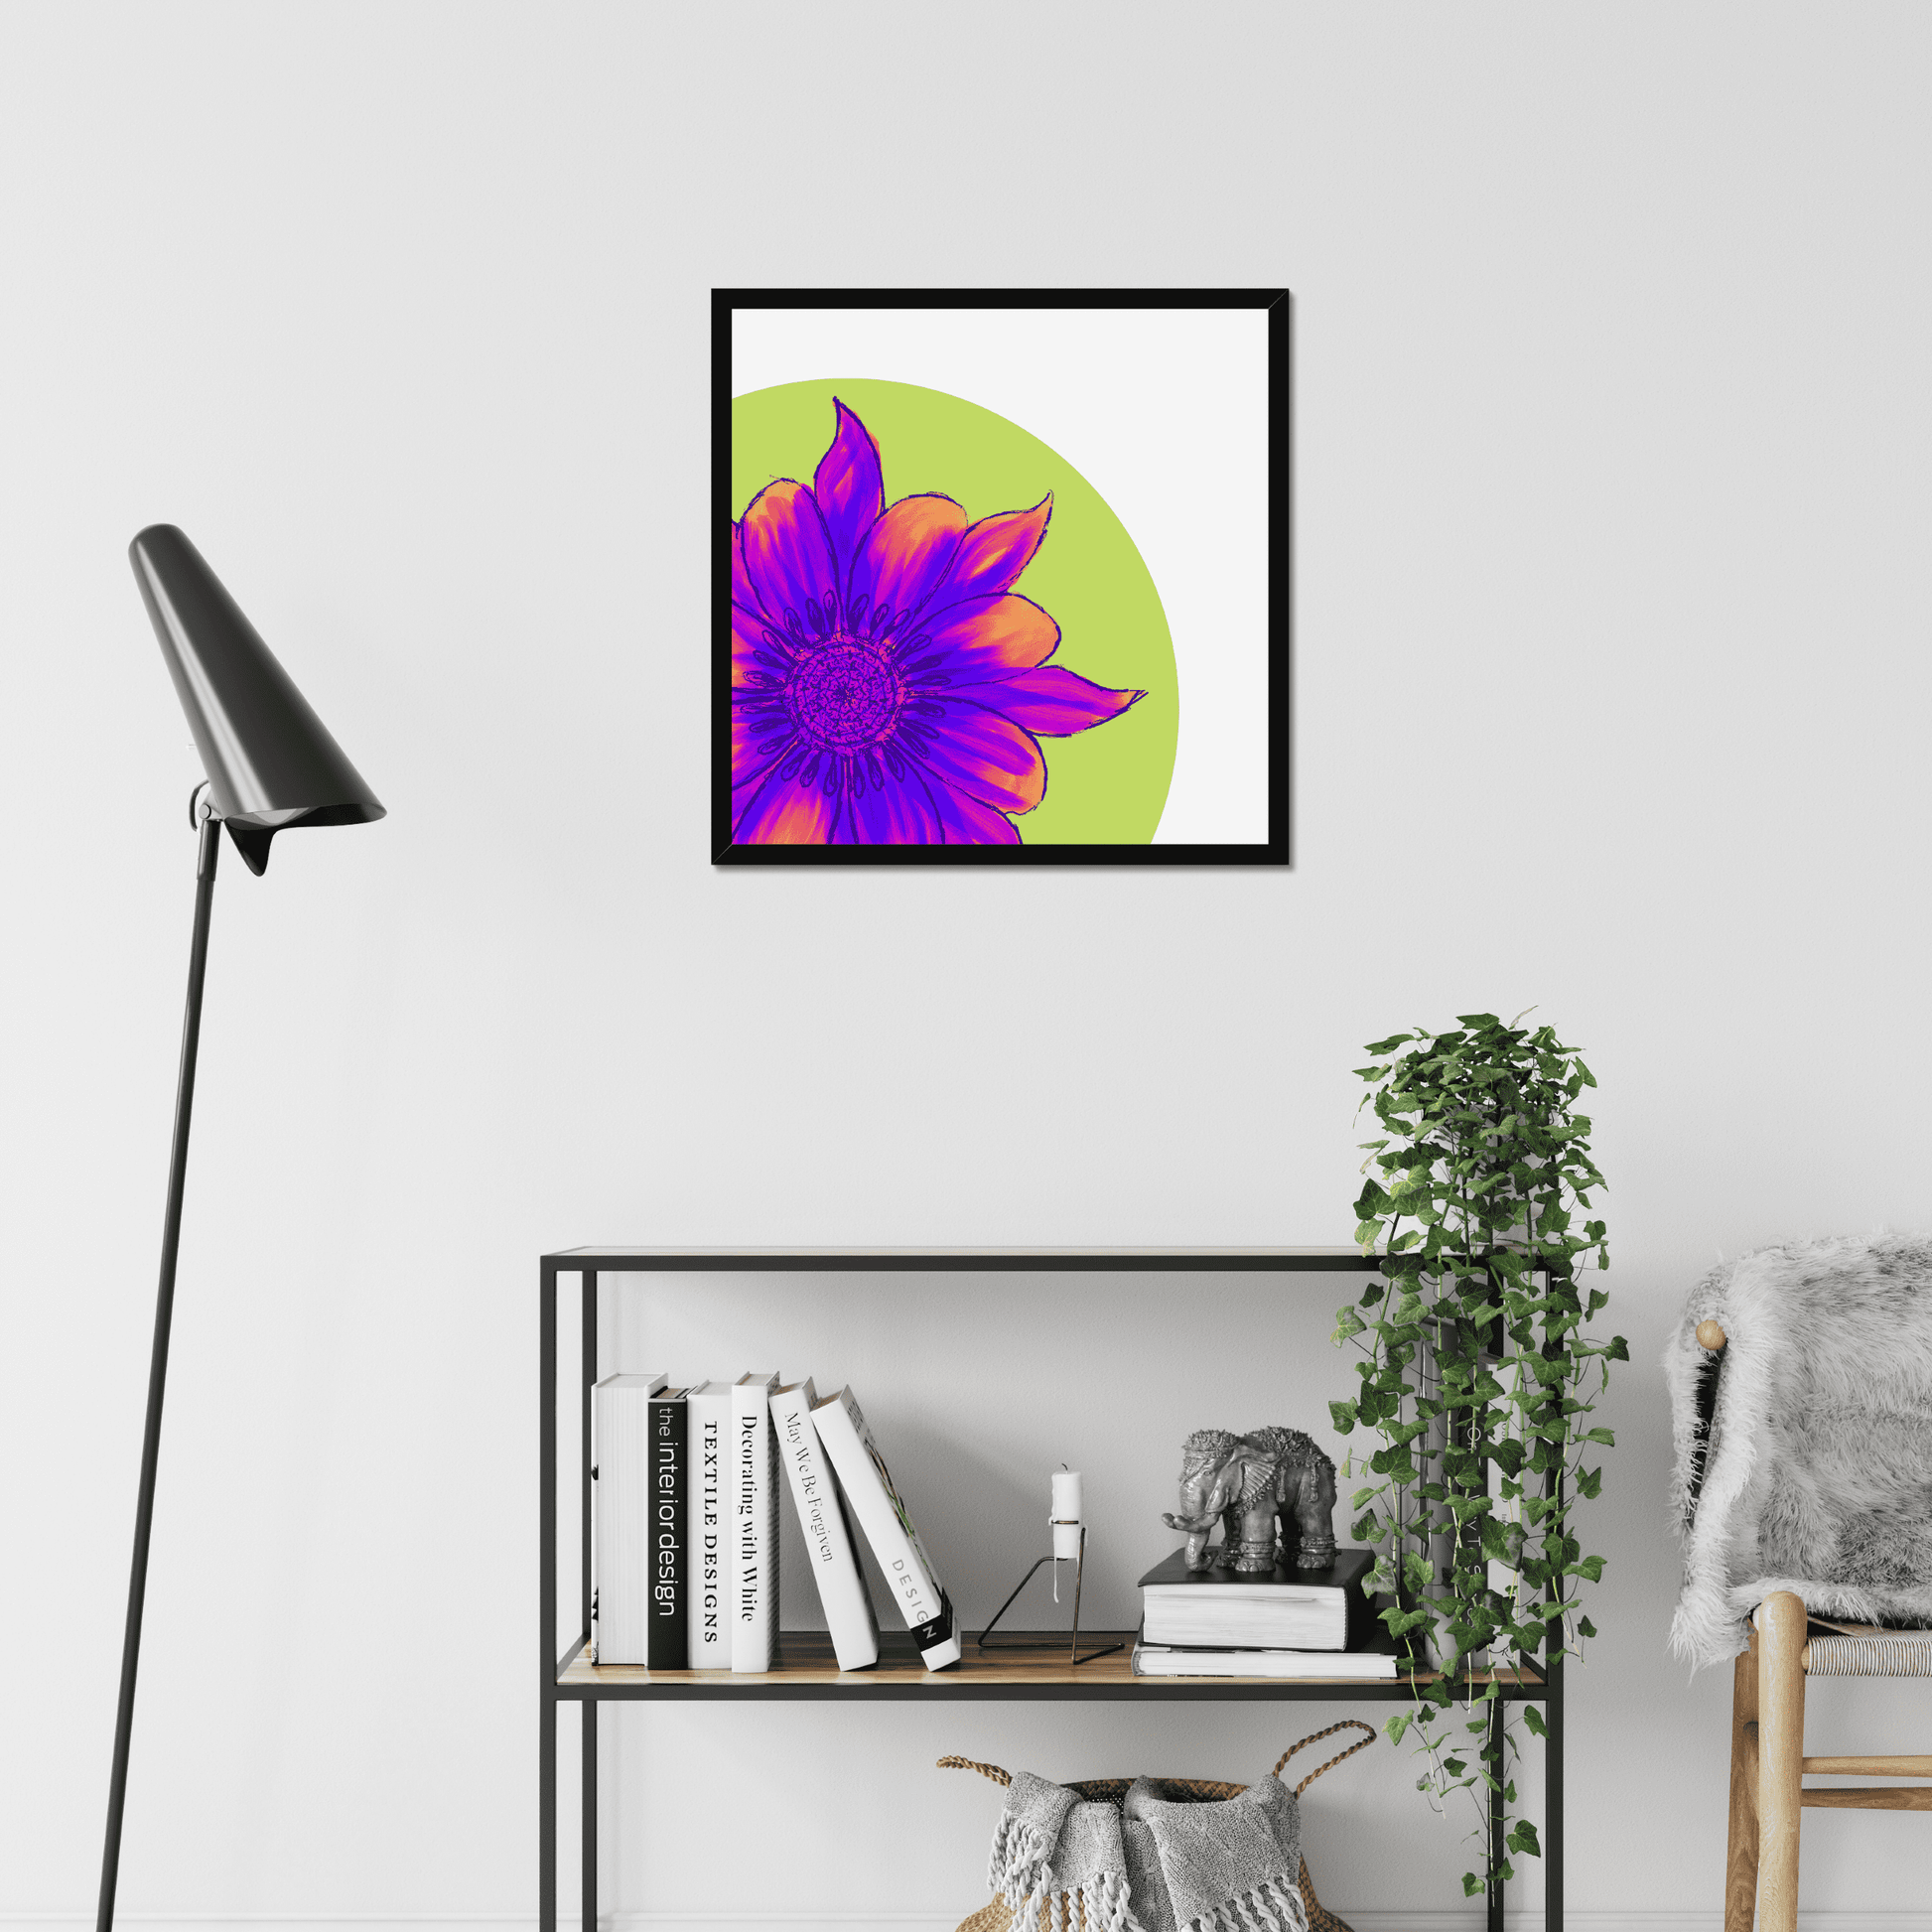 A bright and trippy, acid toned flower print.  This art print is sure to add some eclectic vibes to your walls. The acid greens, pinks and purples really pop. And the paint effect flower is truly stunning.   A statement for your decor, standalone or as part of you gallery wall.